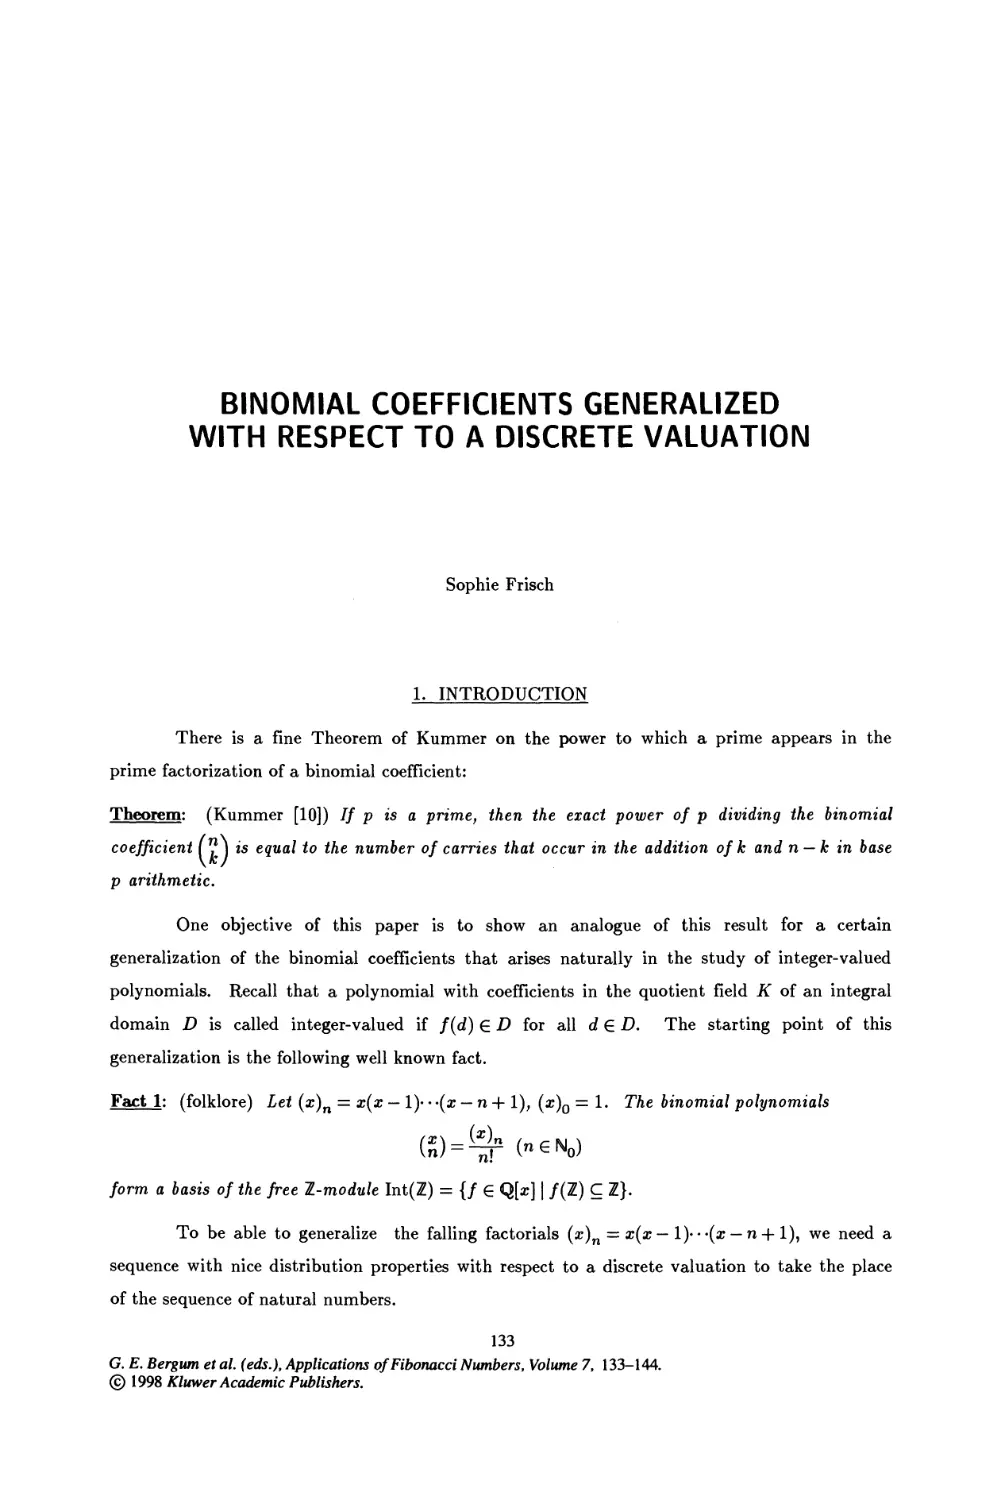 17. Binomial Coefficients Generalized with Respect to a Discrete Valuation